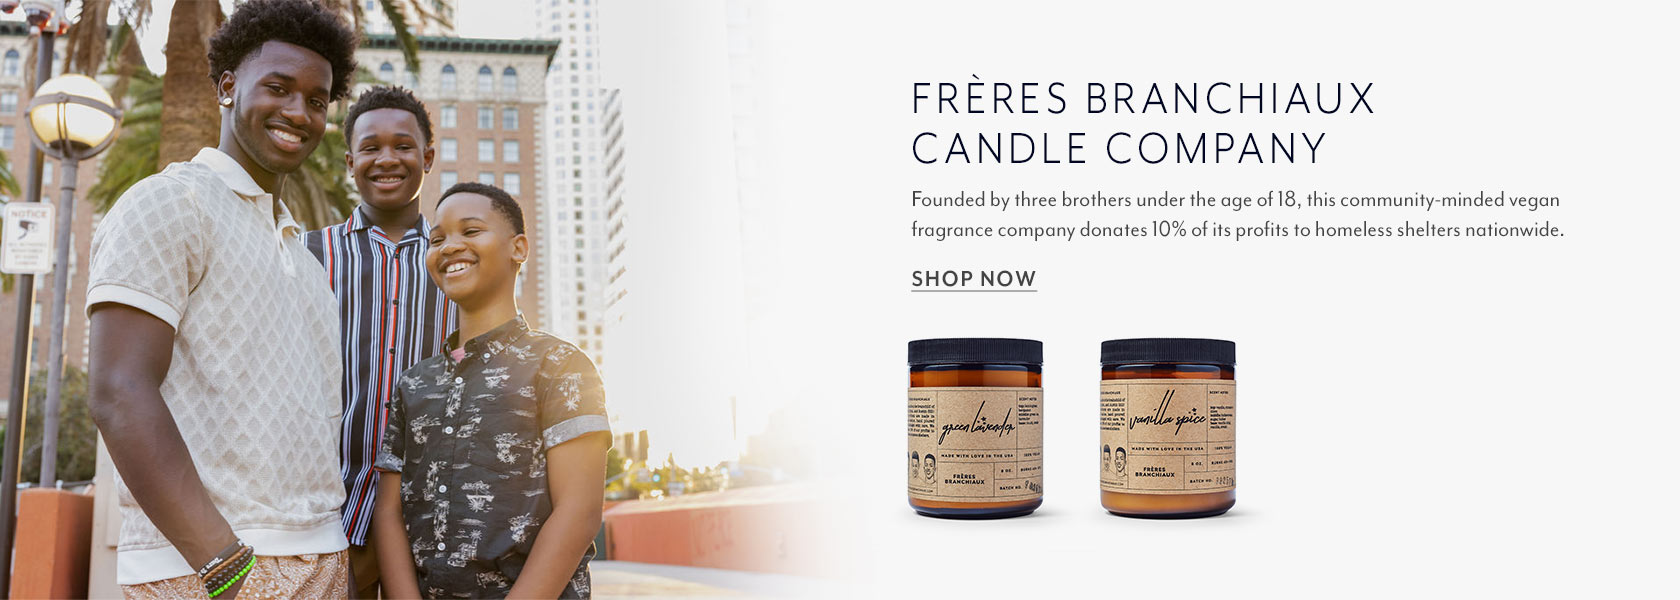 Freres Branchiaux Candle Company. Founded by three brothers under the age of 18, this community-minded vegan fragrance company donates 10% of its profits to homeless shelters nationwide. Shop Now.